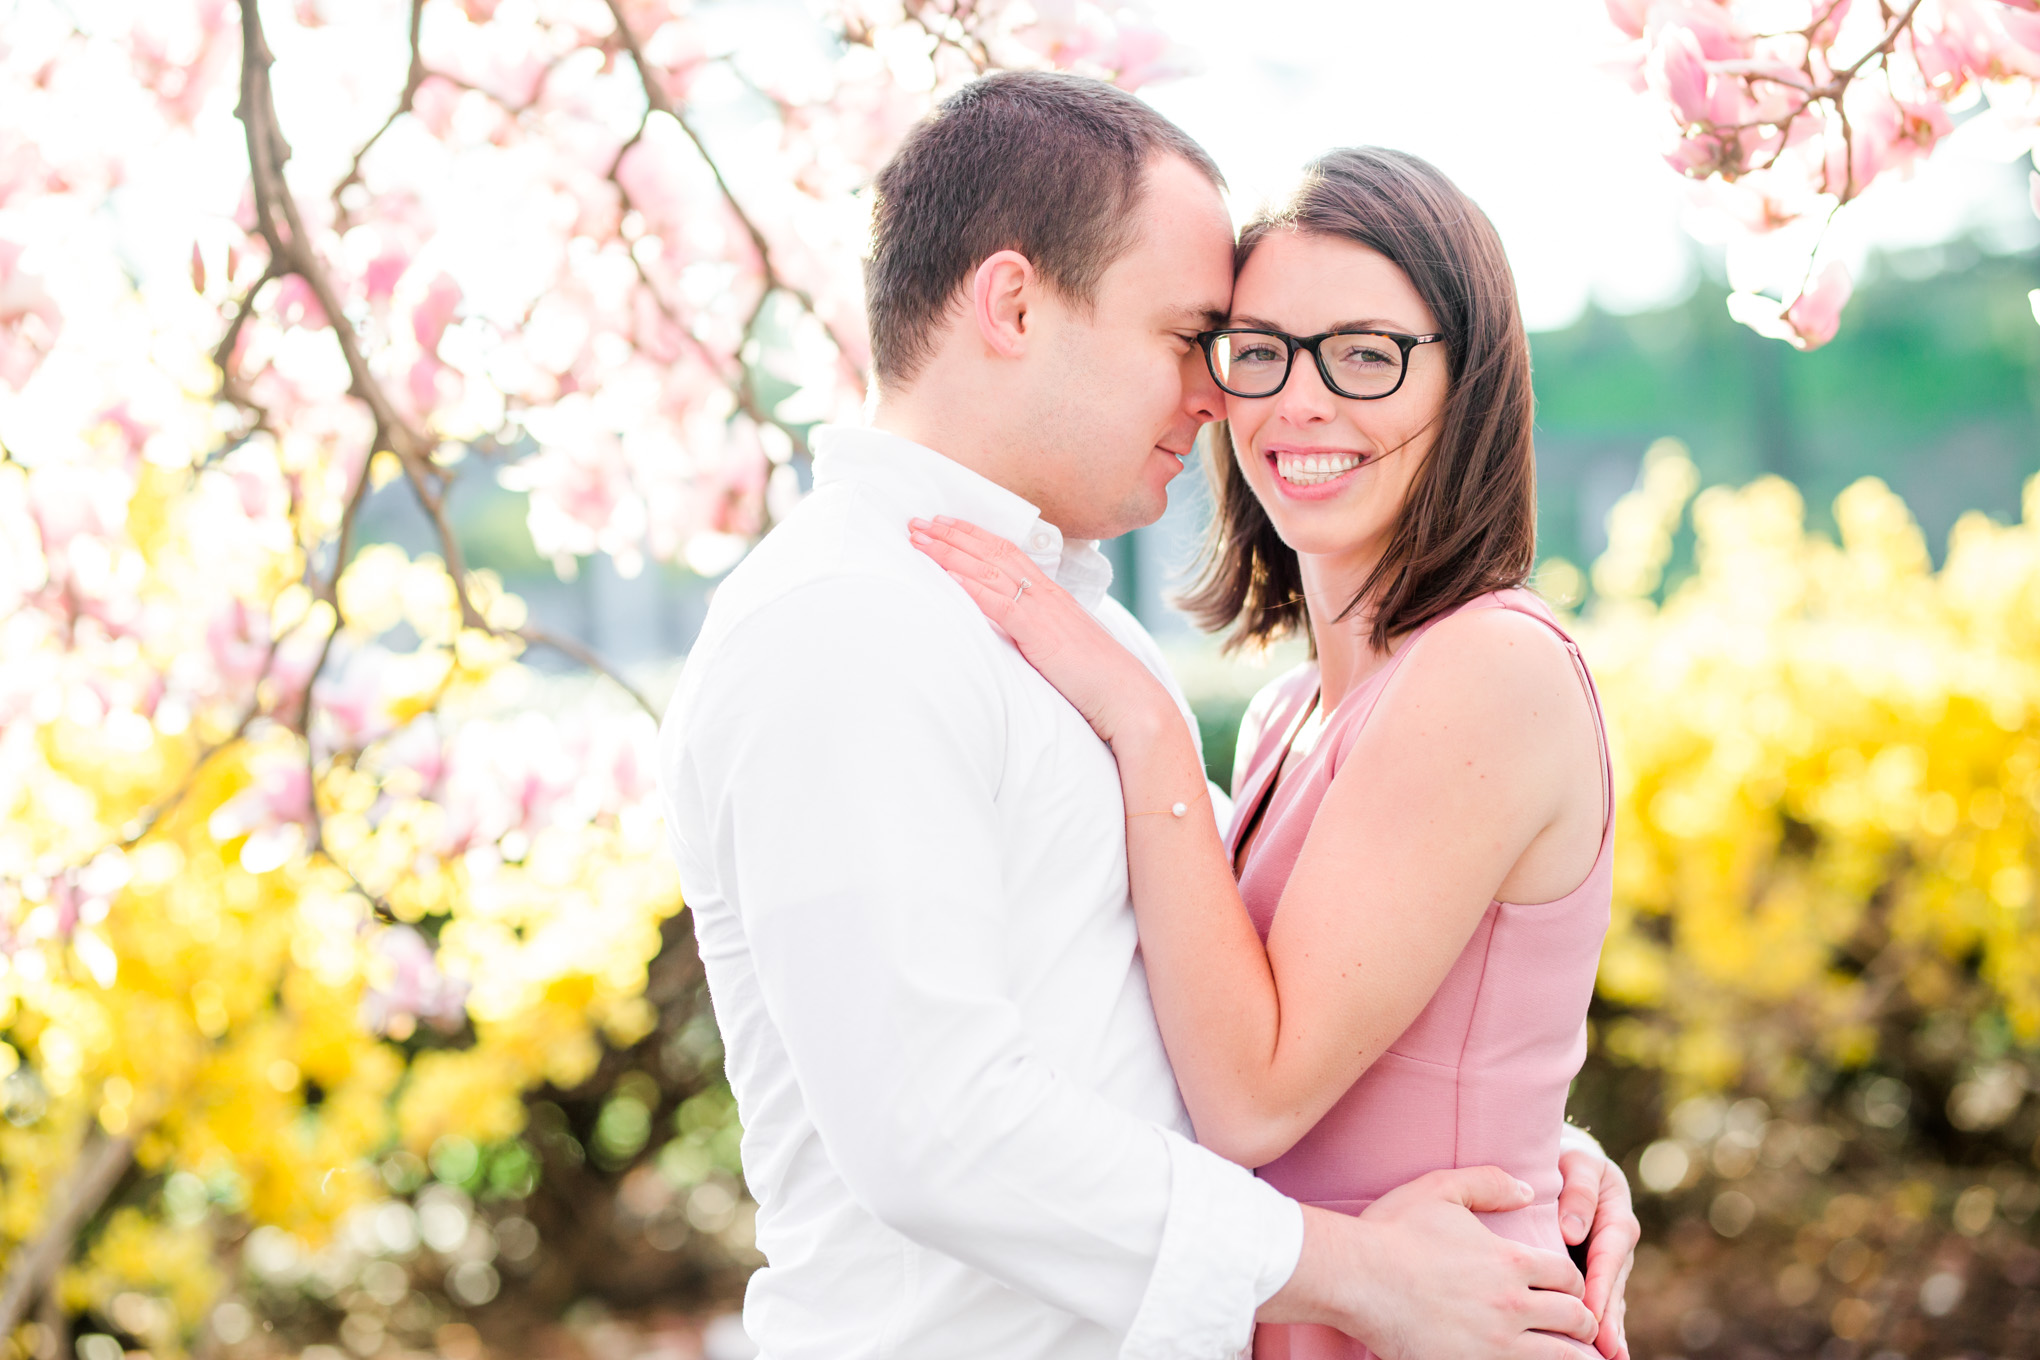 sunny cherry blossoms engagement session, Washington, D.C. engagement photos, Washington D.C. engagement photos, sunrrise engagement photos, cherry blossom engagement photos, D.C. cherry bloossoms, D.C. cherry blossoms photos, cherry blossom photos, cherry blossoms portrraits, sunny engagement photos, classic engagement photos, Rachel E.H. Photography, engagement session style, forsythia